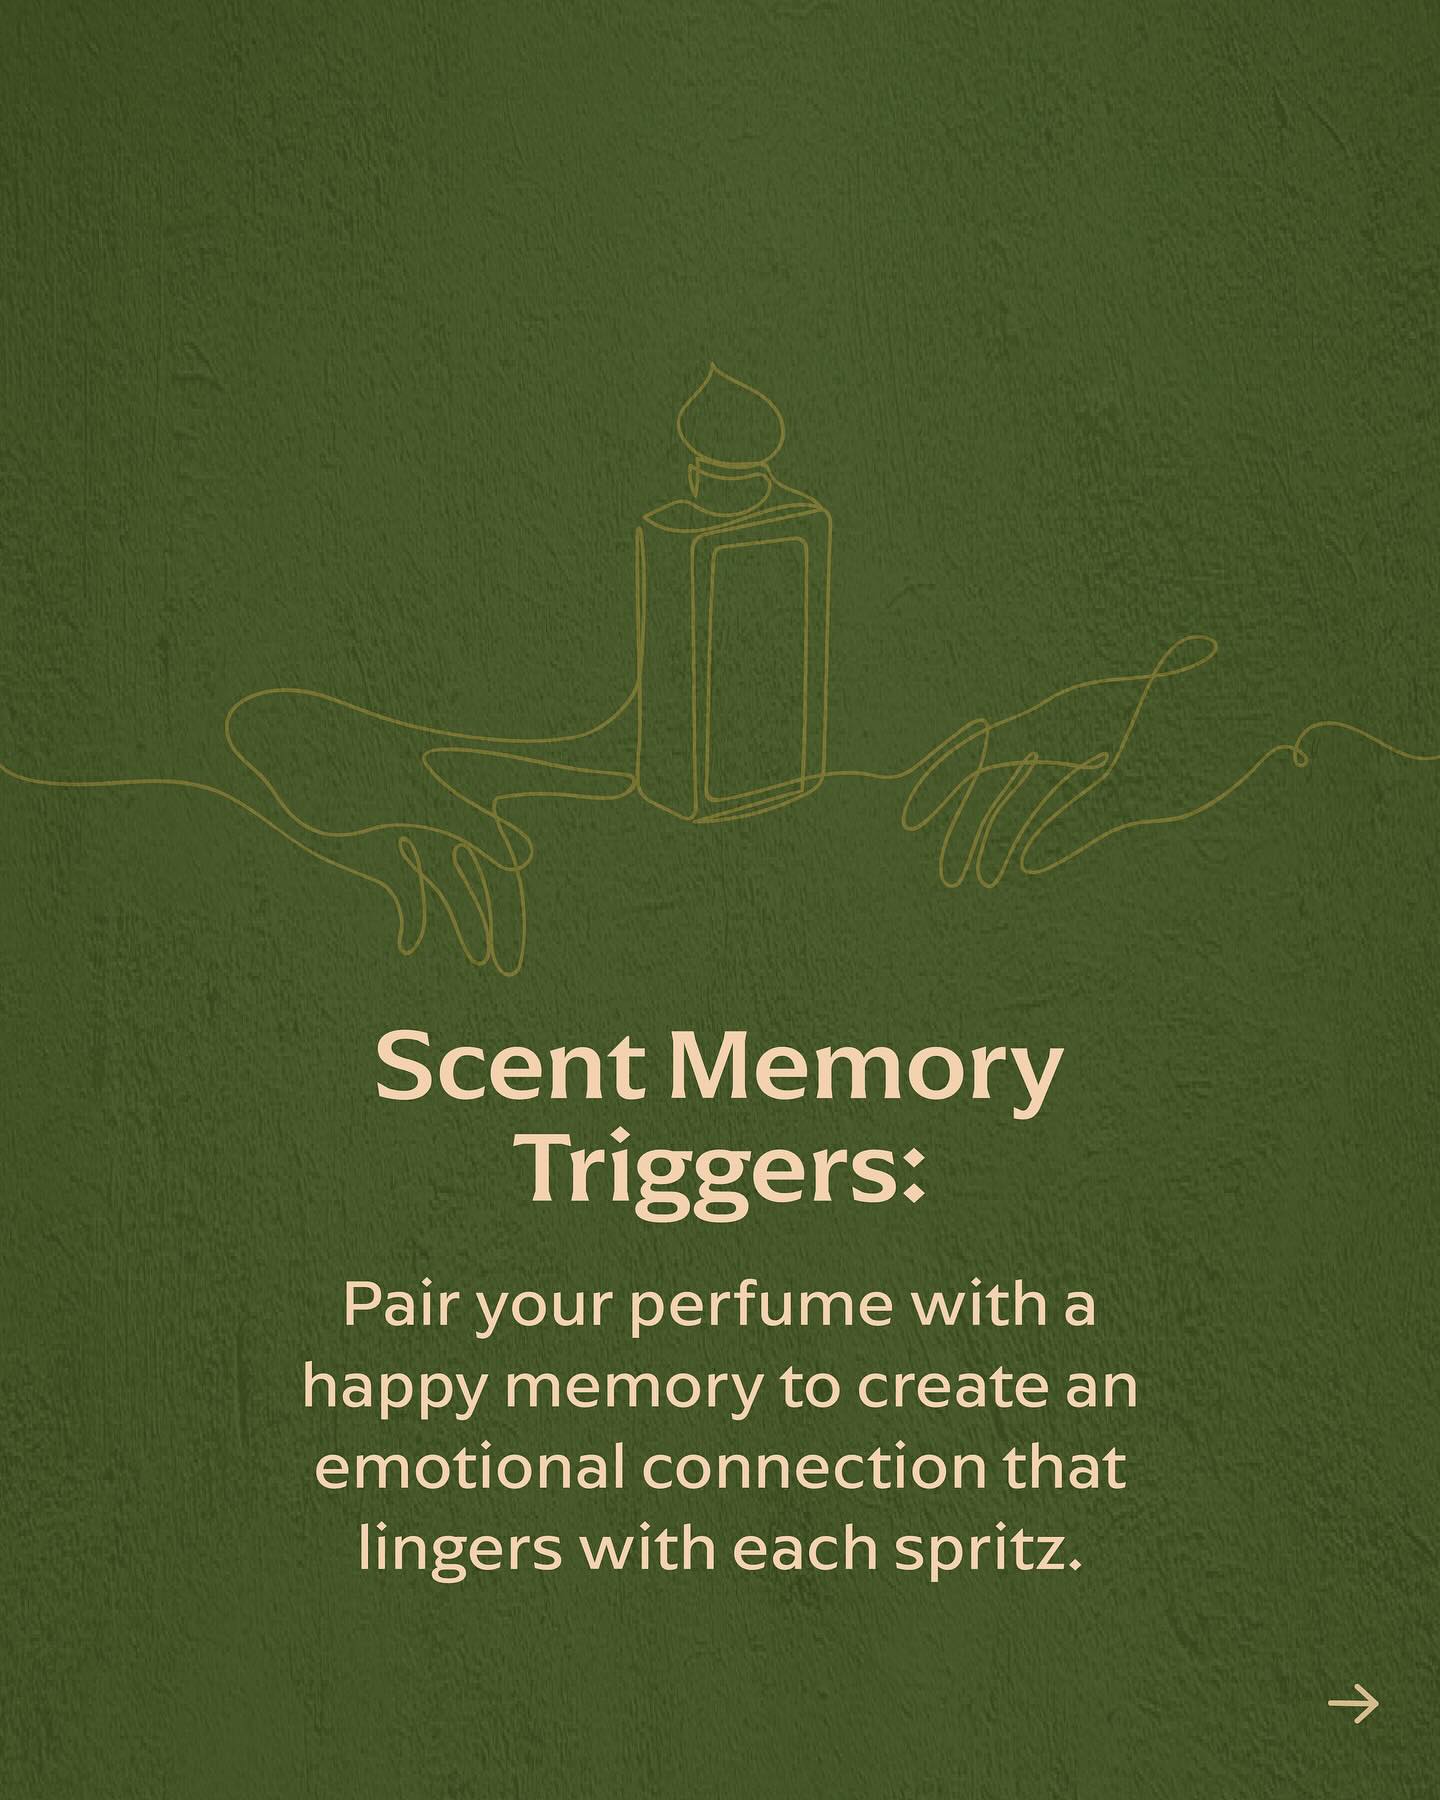 scent memory triggers nemat pair perfume with emotional connection nemat fragrance